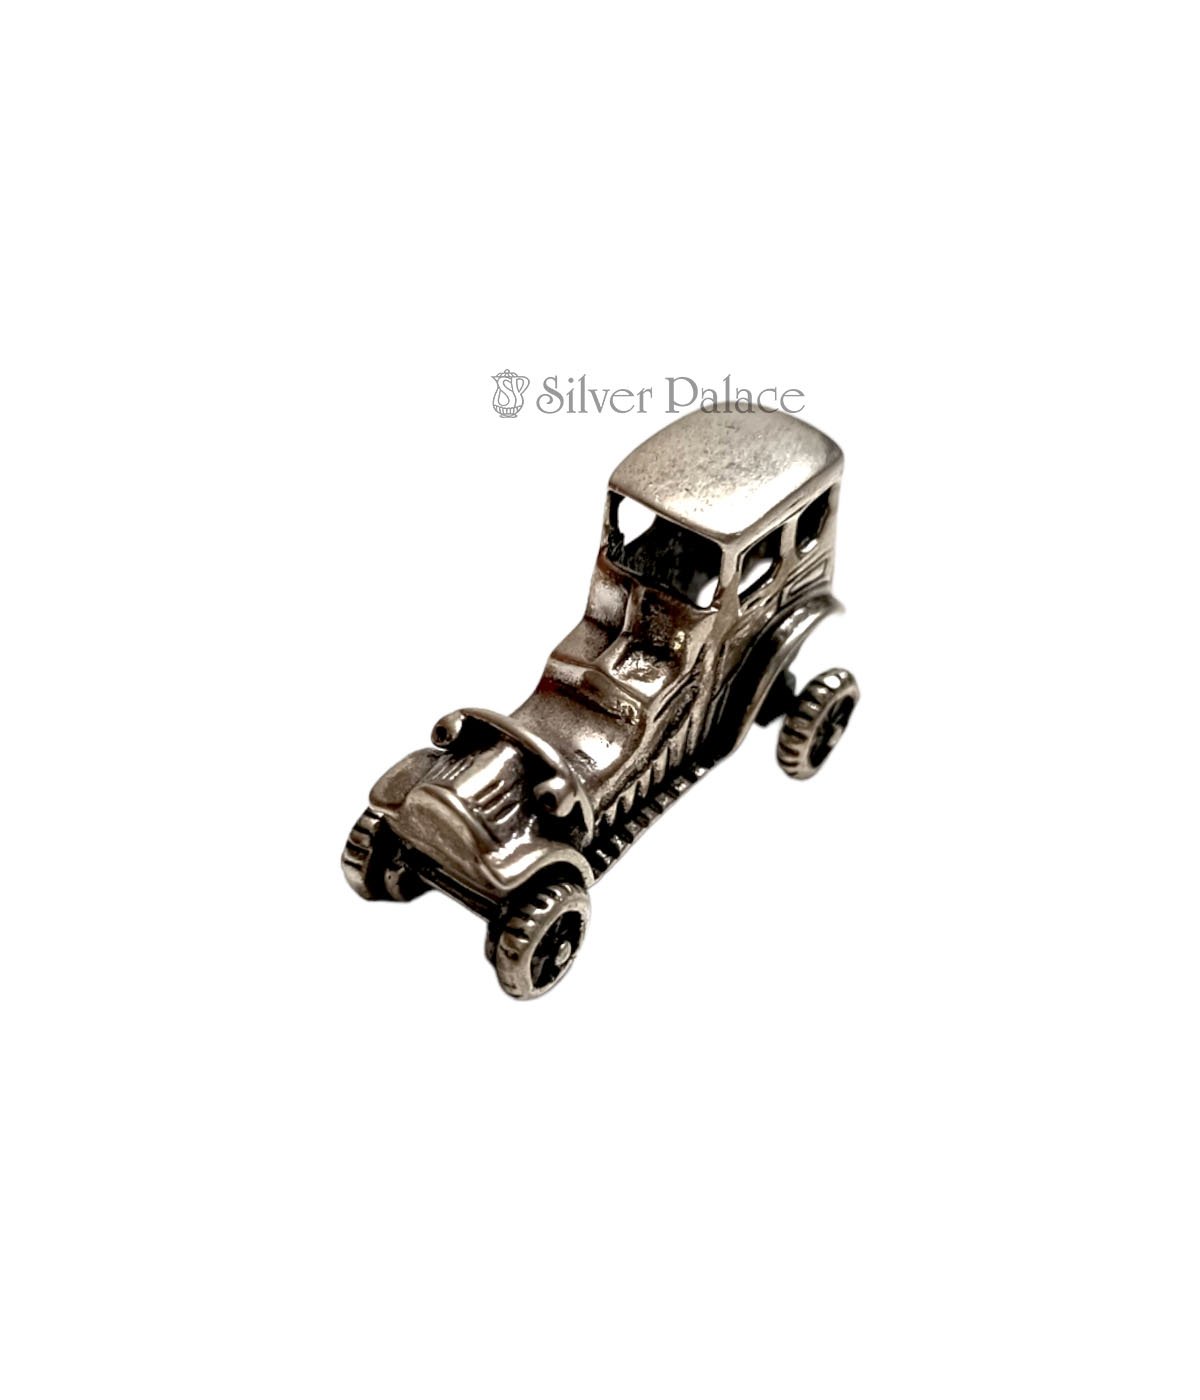 STERLING SILVER MINIATURE LONG JEEP GIFT